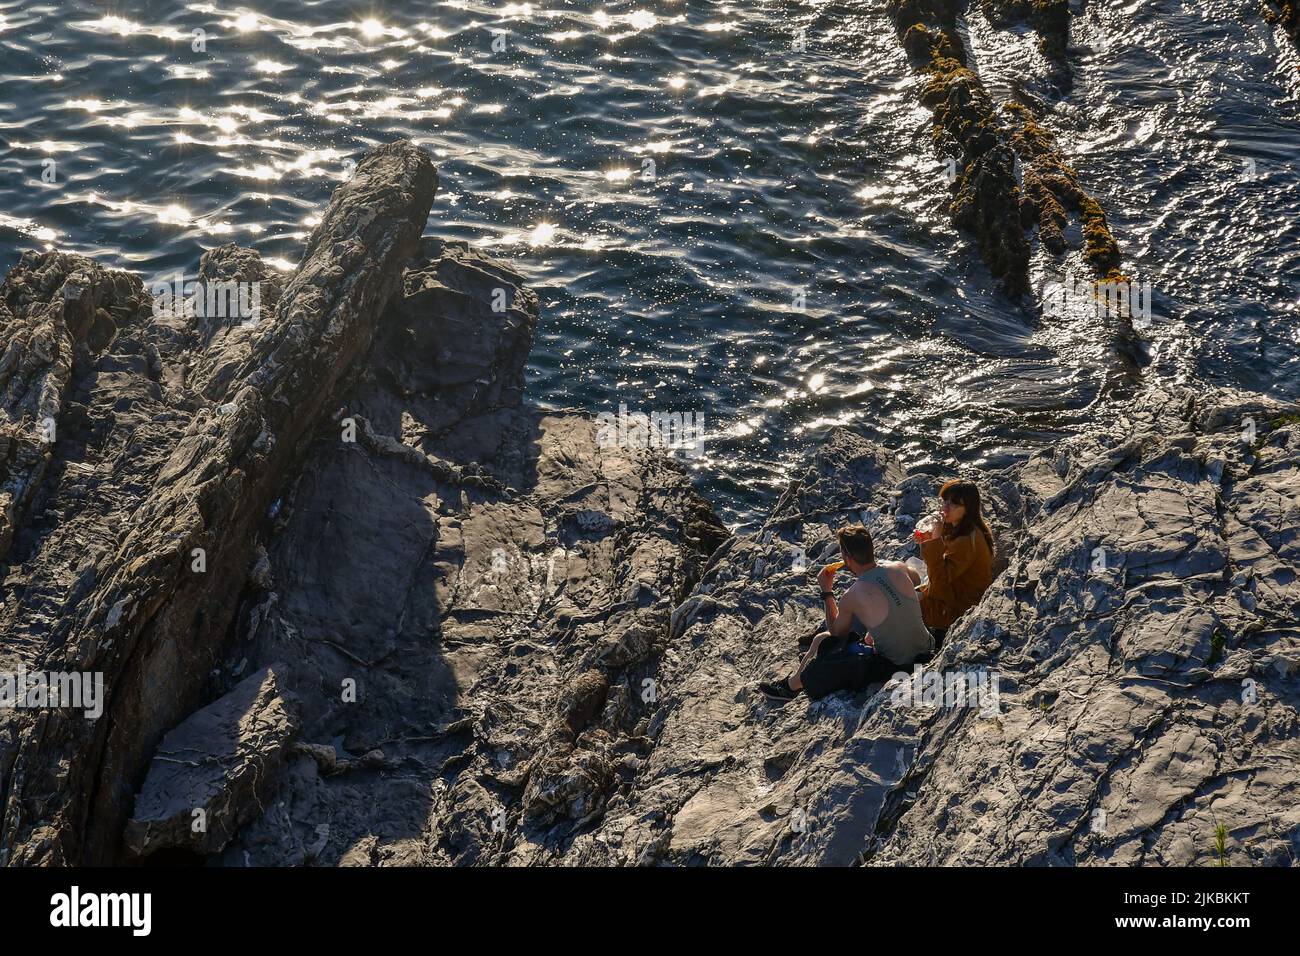 A young couple takes a snack break sitting on the rocks by the sea at sunset, Nervi, Genoa, Liguria, Italy Stock Photo